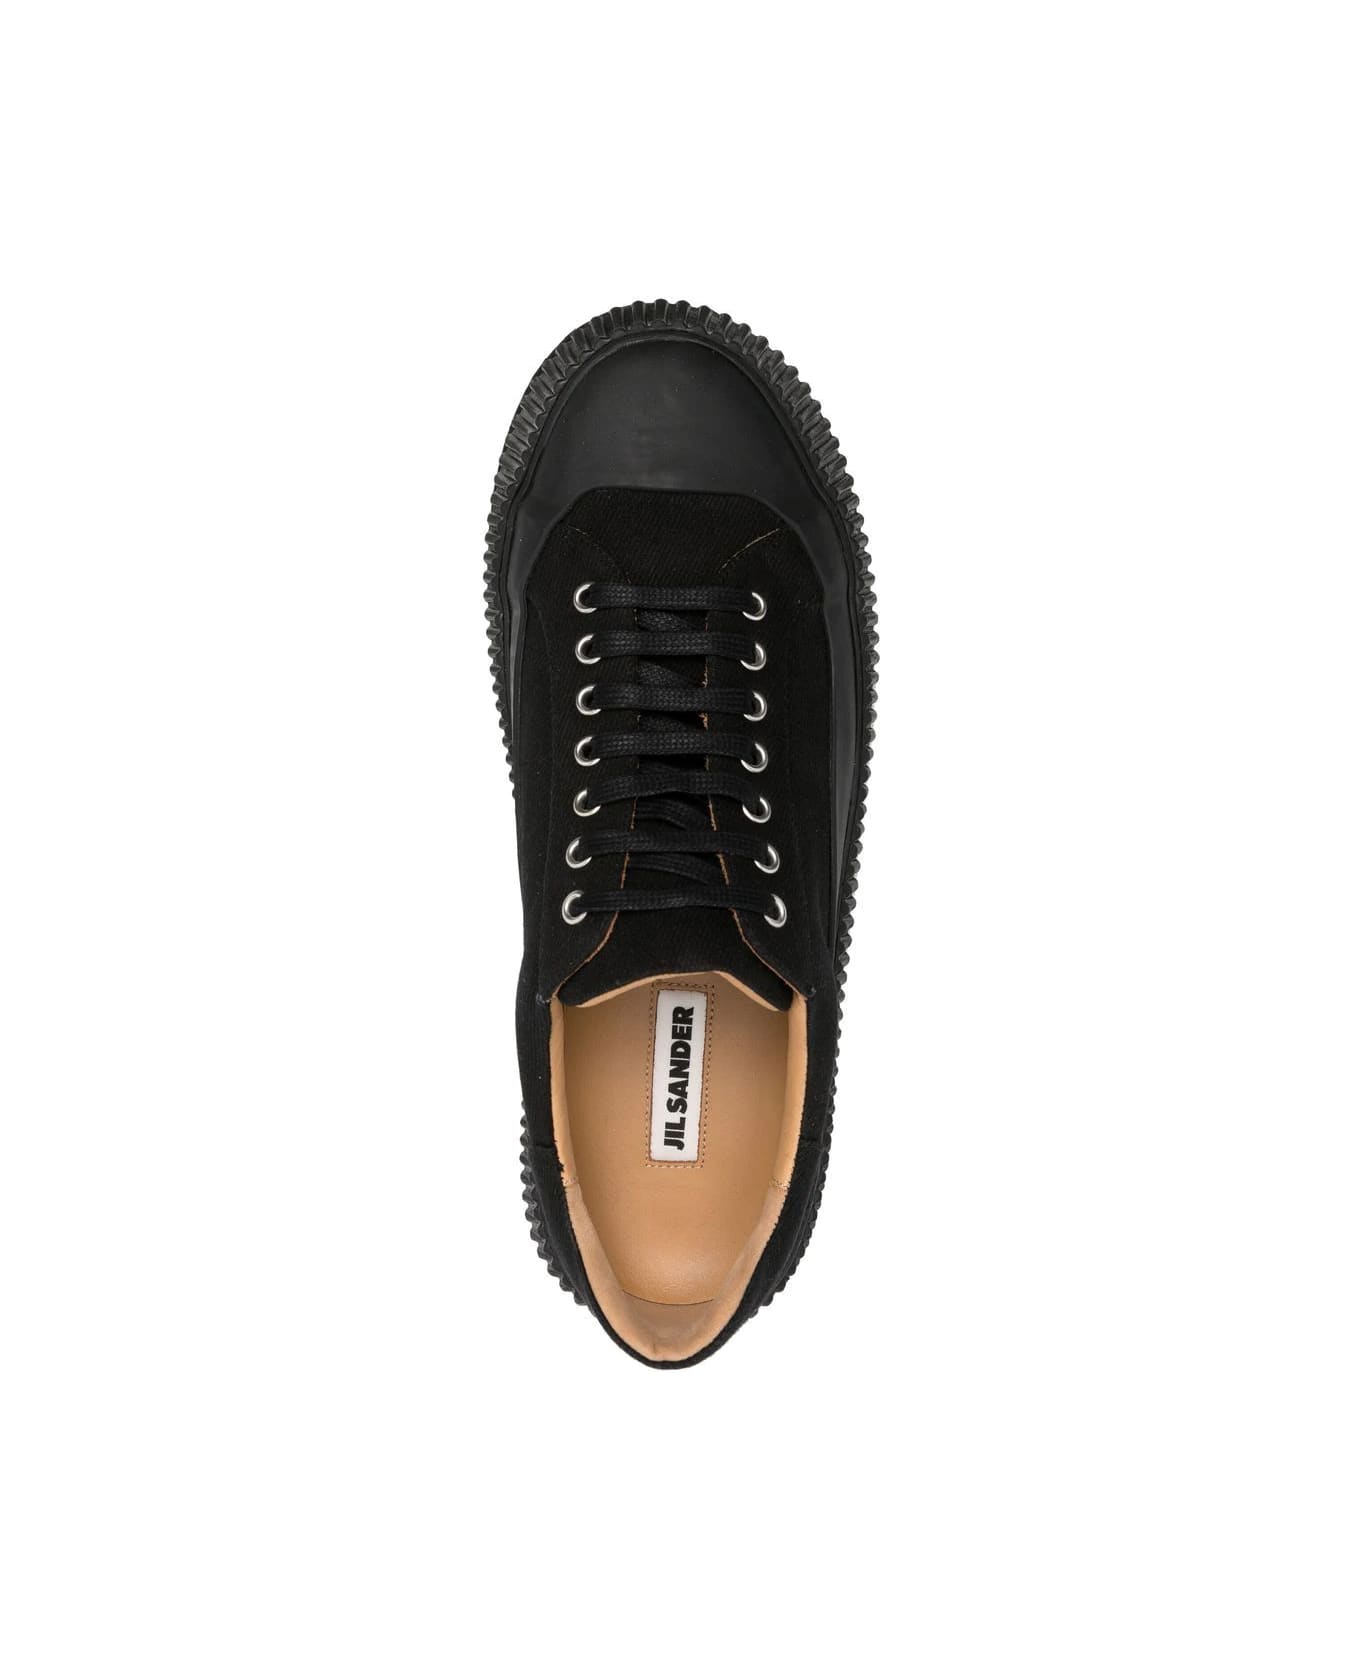 Jil Sander Low Laced Sneakers With Vulcanized Rubber Sole - Black